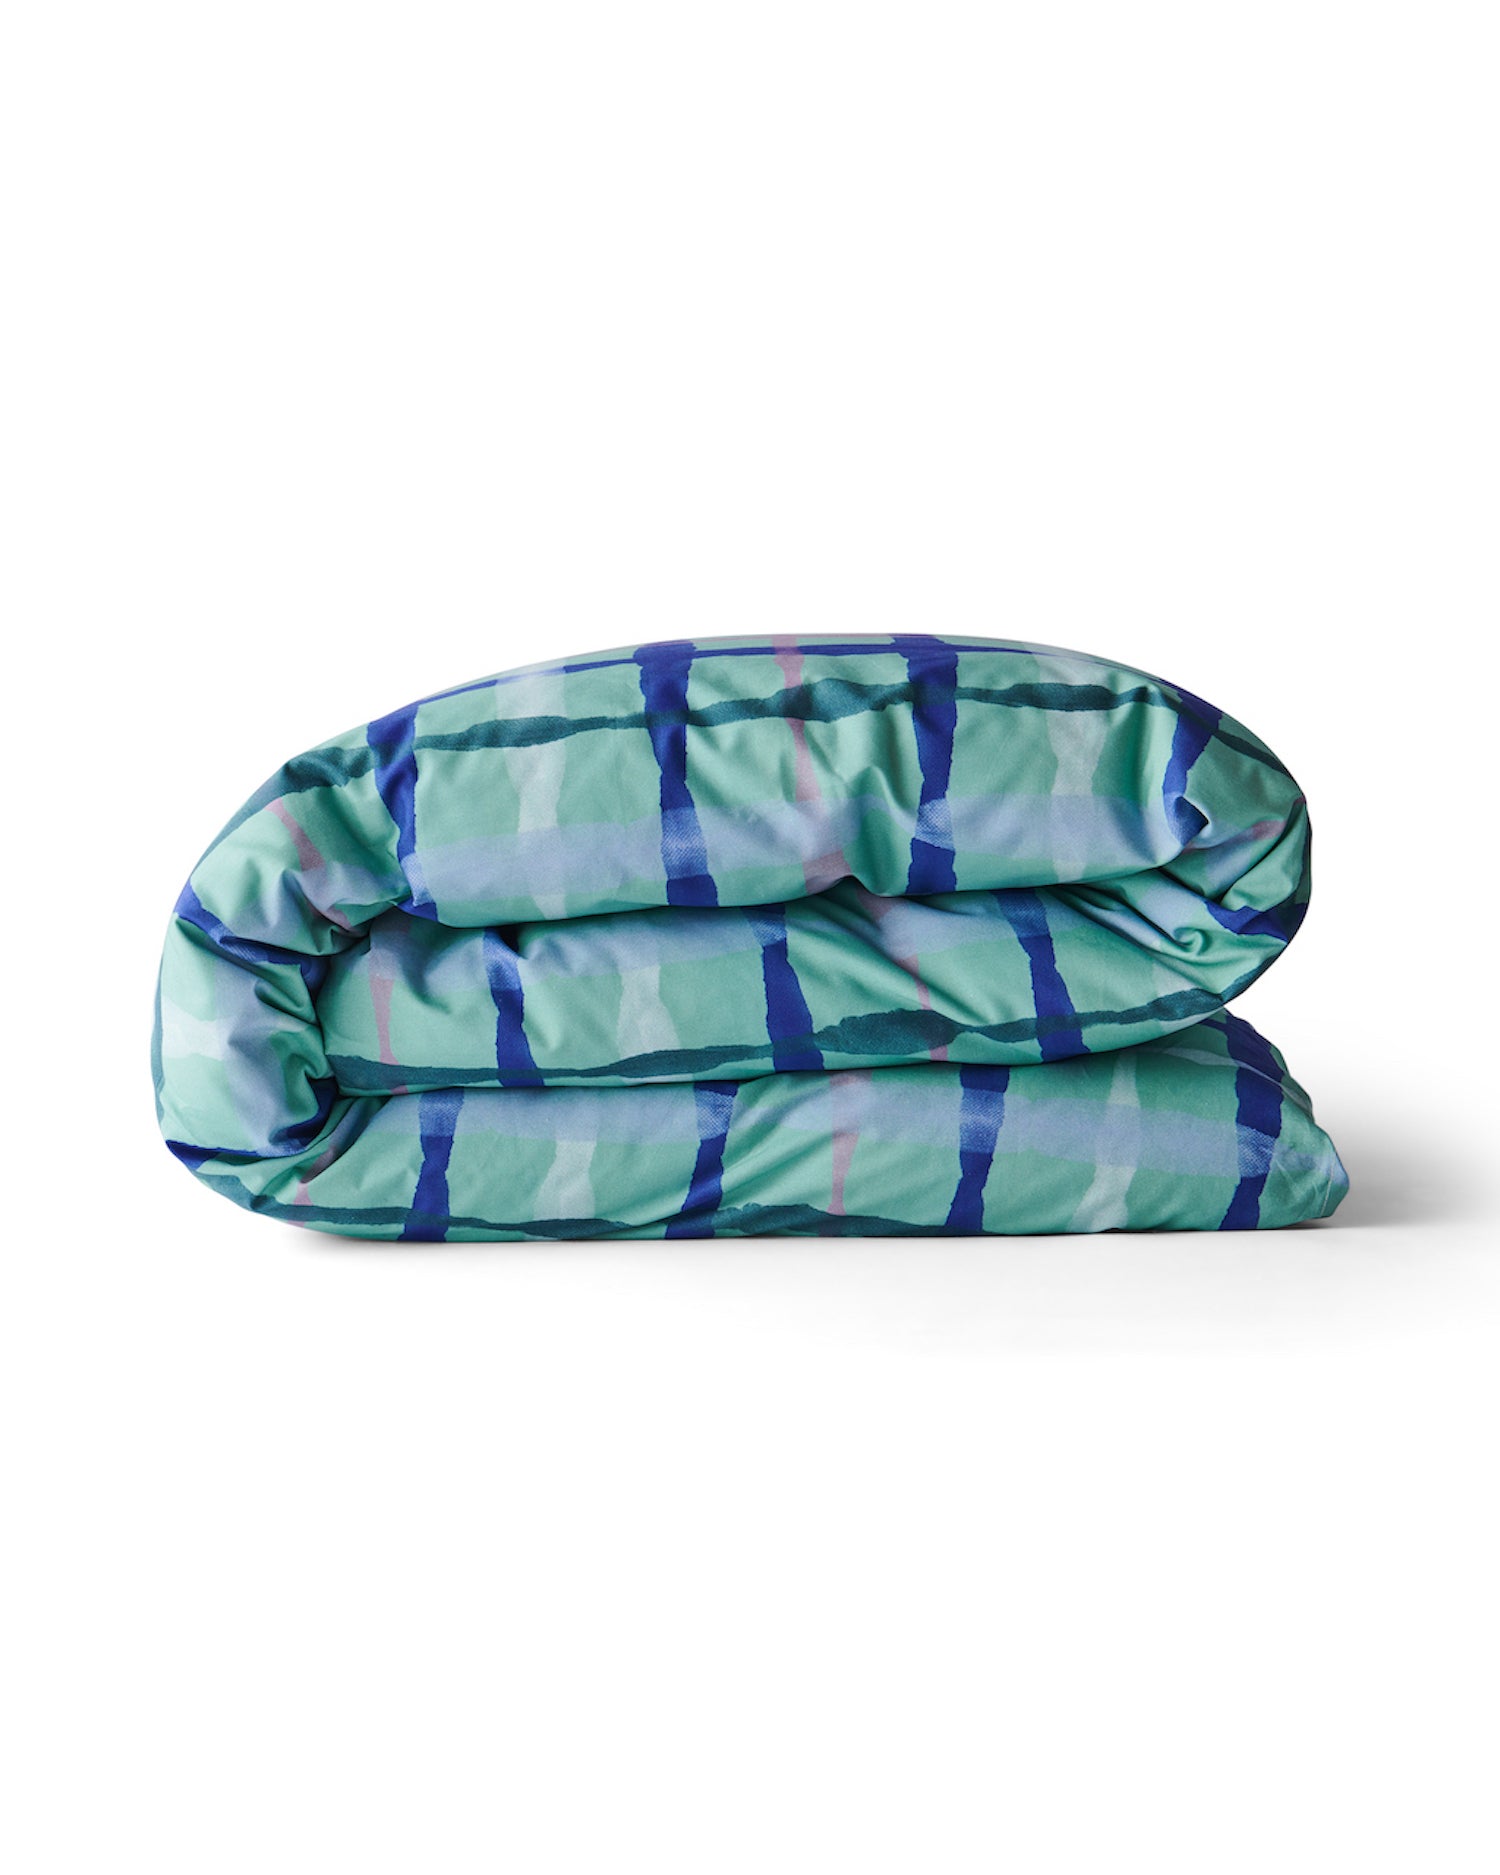 Cotton Quilt Cover - Inky Wink Green